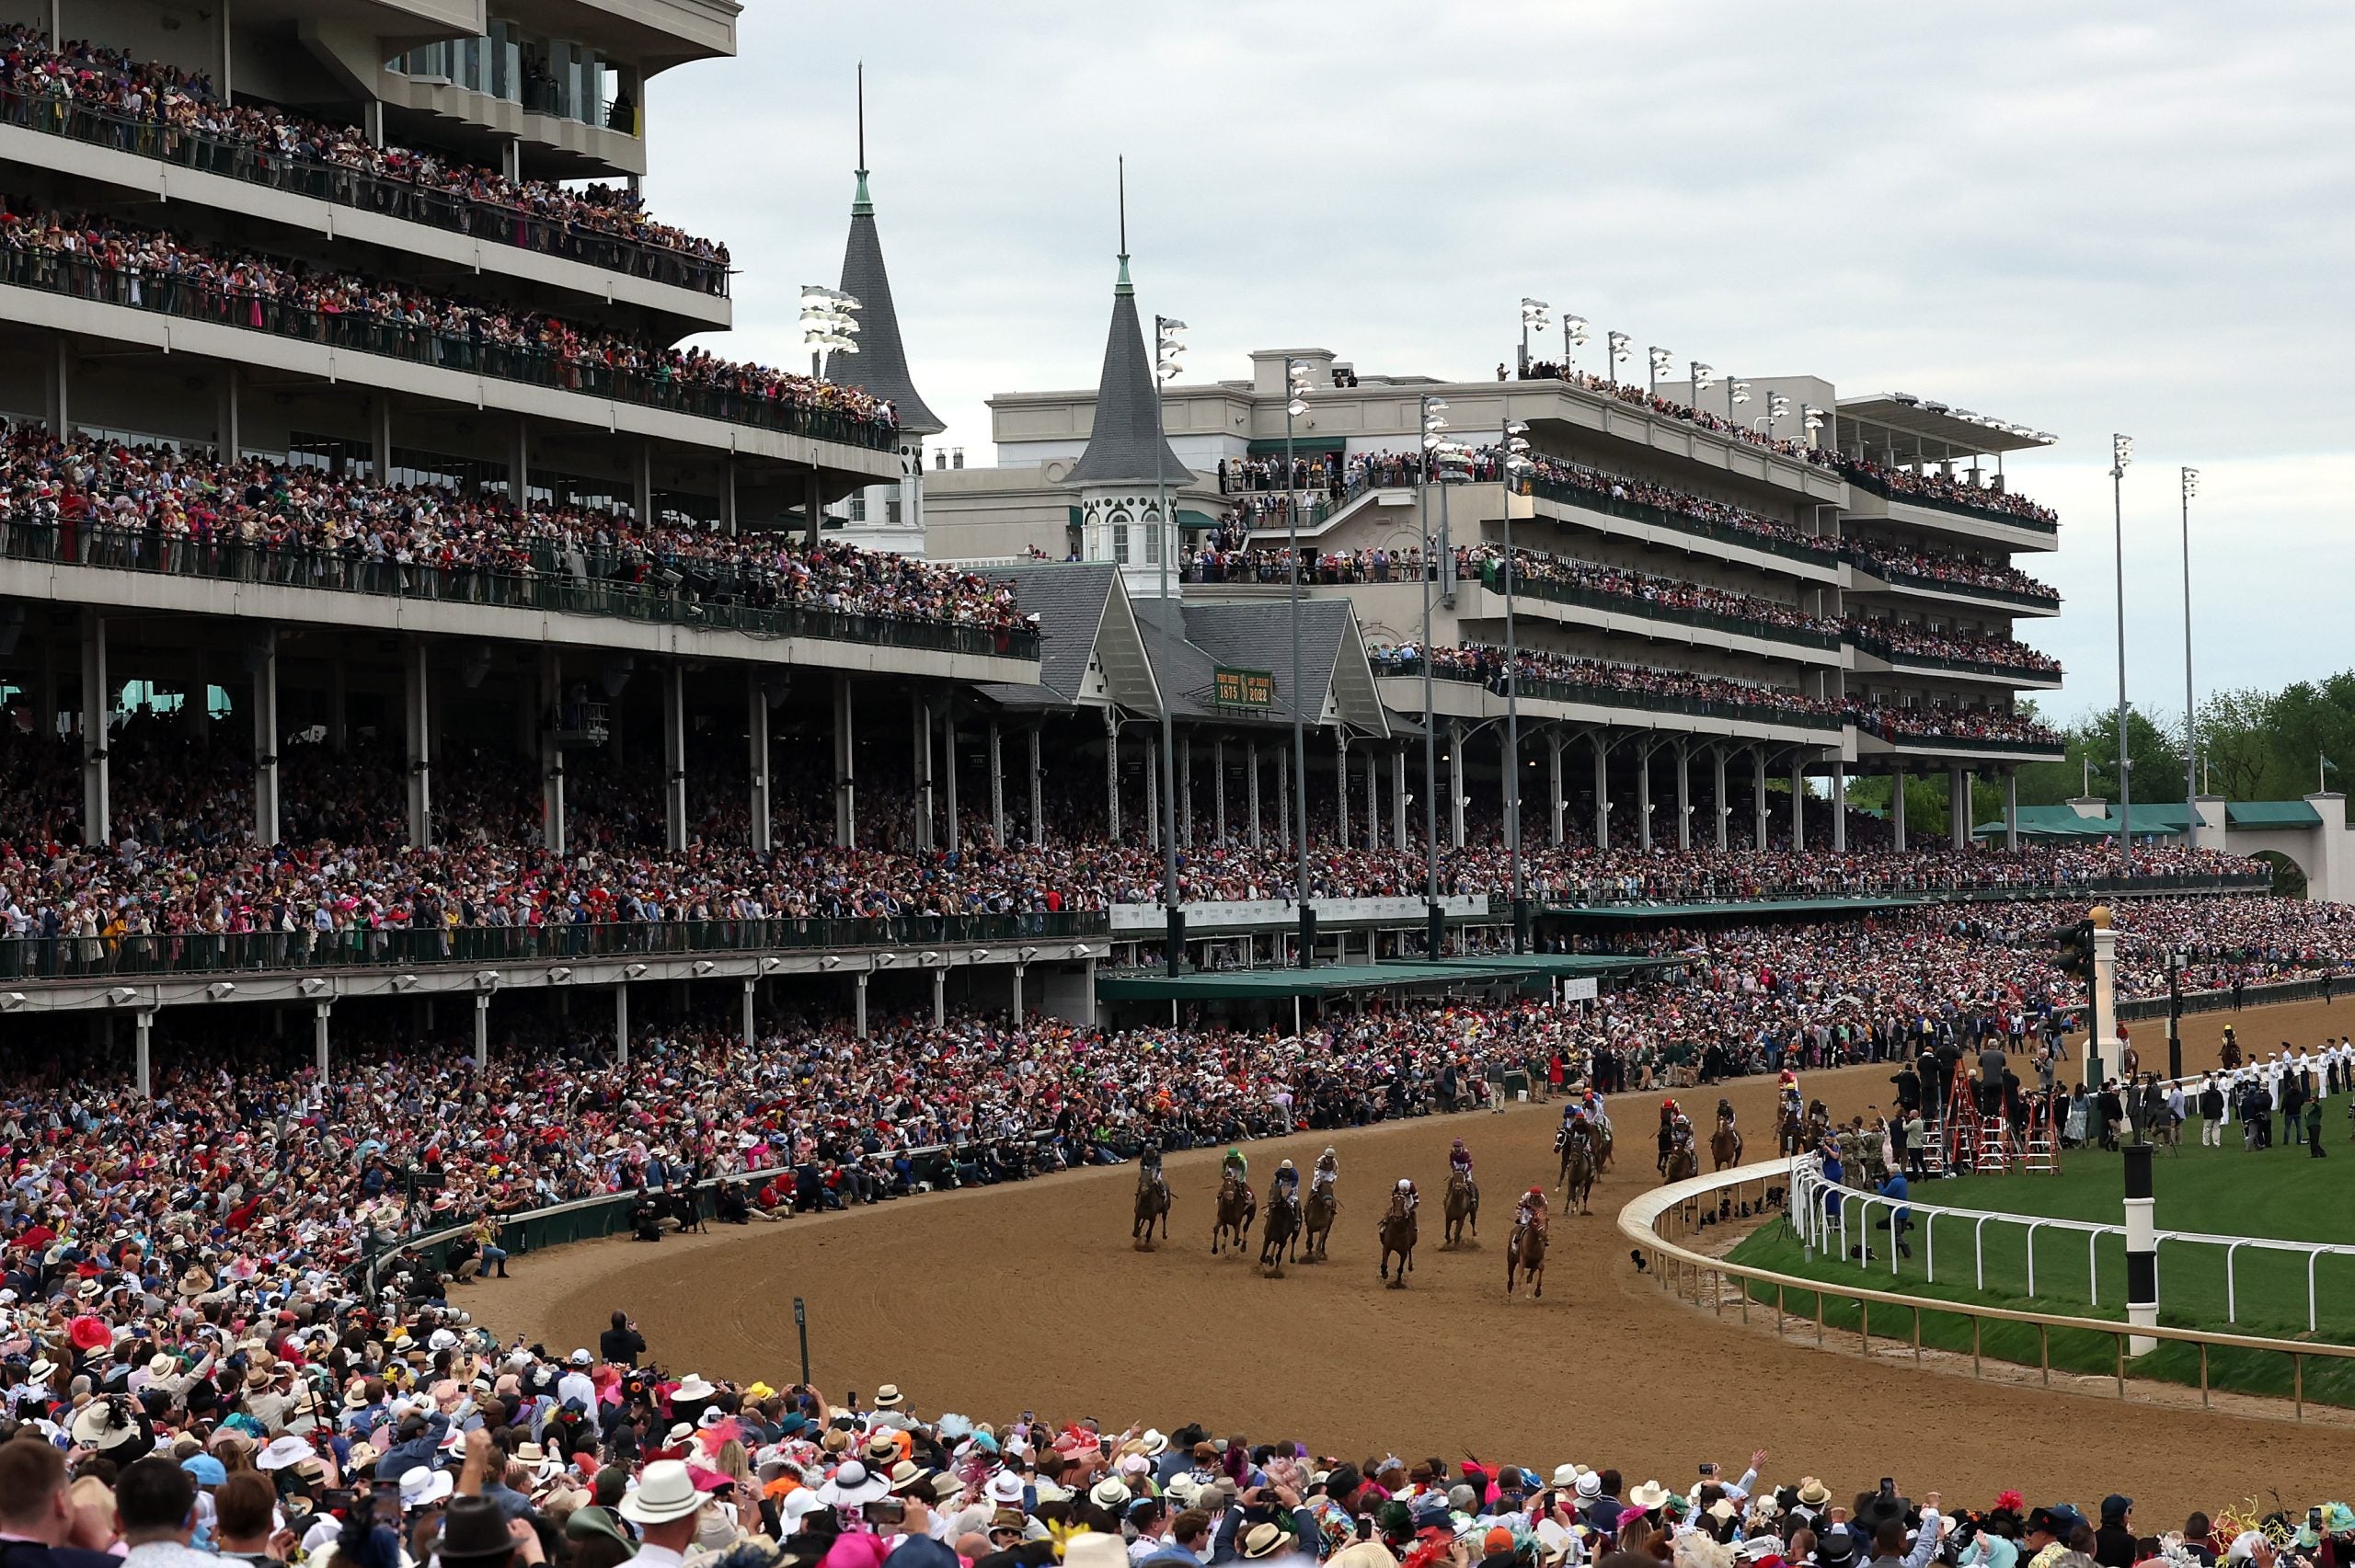 WATCH: Inside The Luxurious Return of the Kentucky Derby Experience